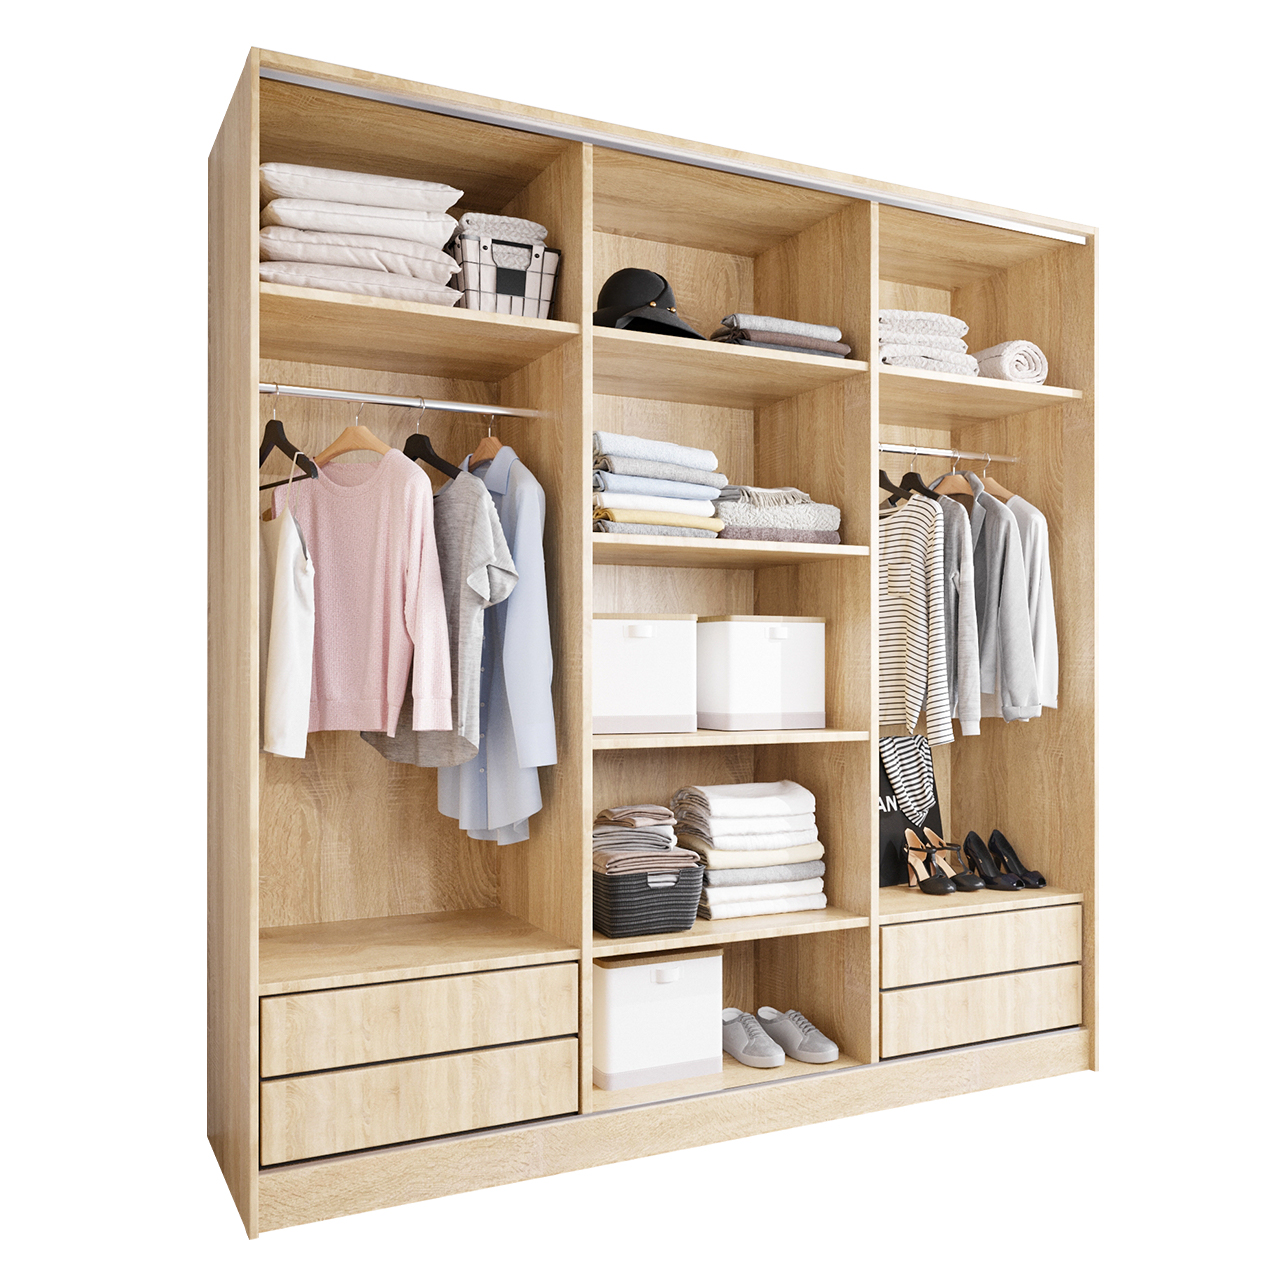 Sliding Wardrobe with Drawers BRITTO D 180 sonoma